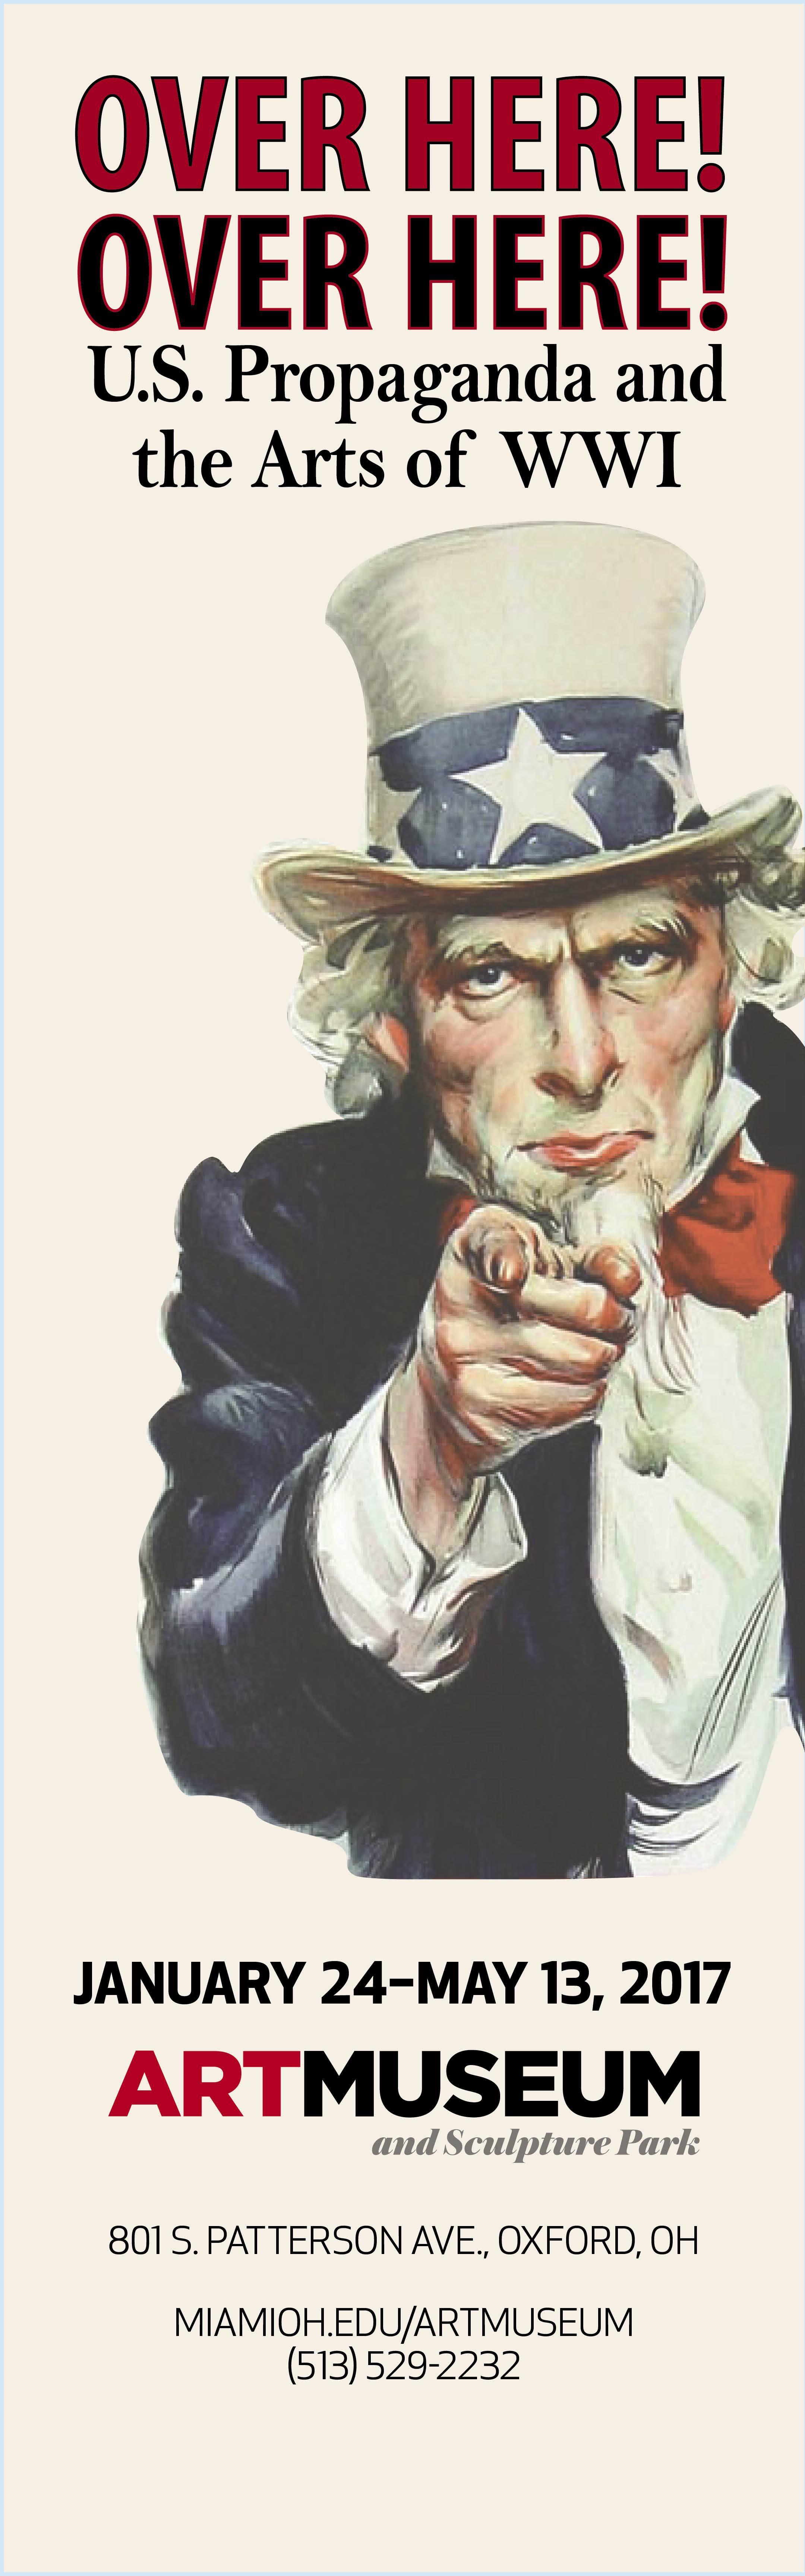 J.M. Flagg’s iconic Uncle Sam points at the viewer. Text 'Over Here! Over Here! U.S. Propaganda and the Arts of WWI. January 24-May 13, 2017.